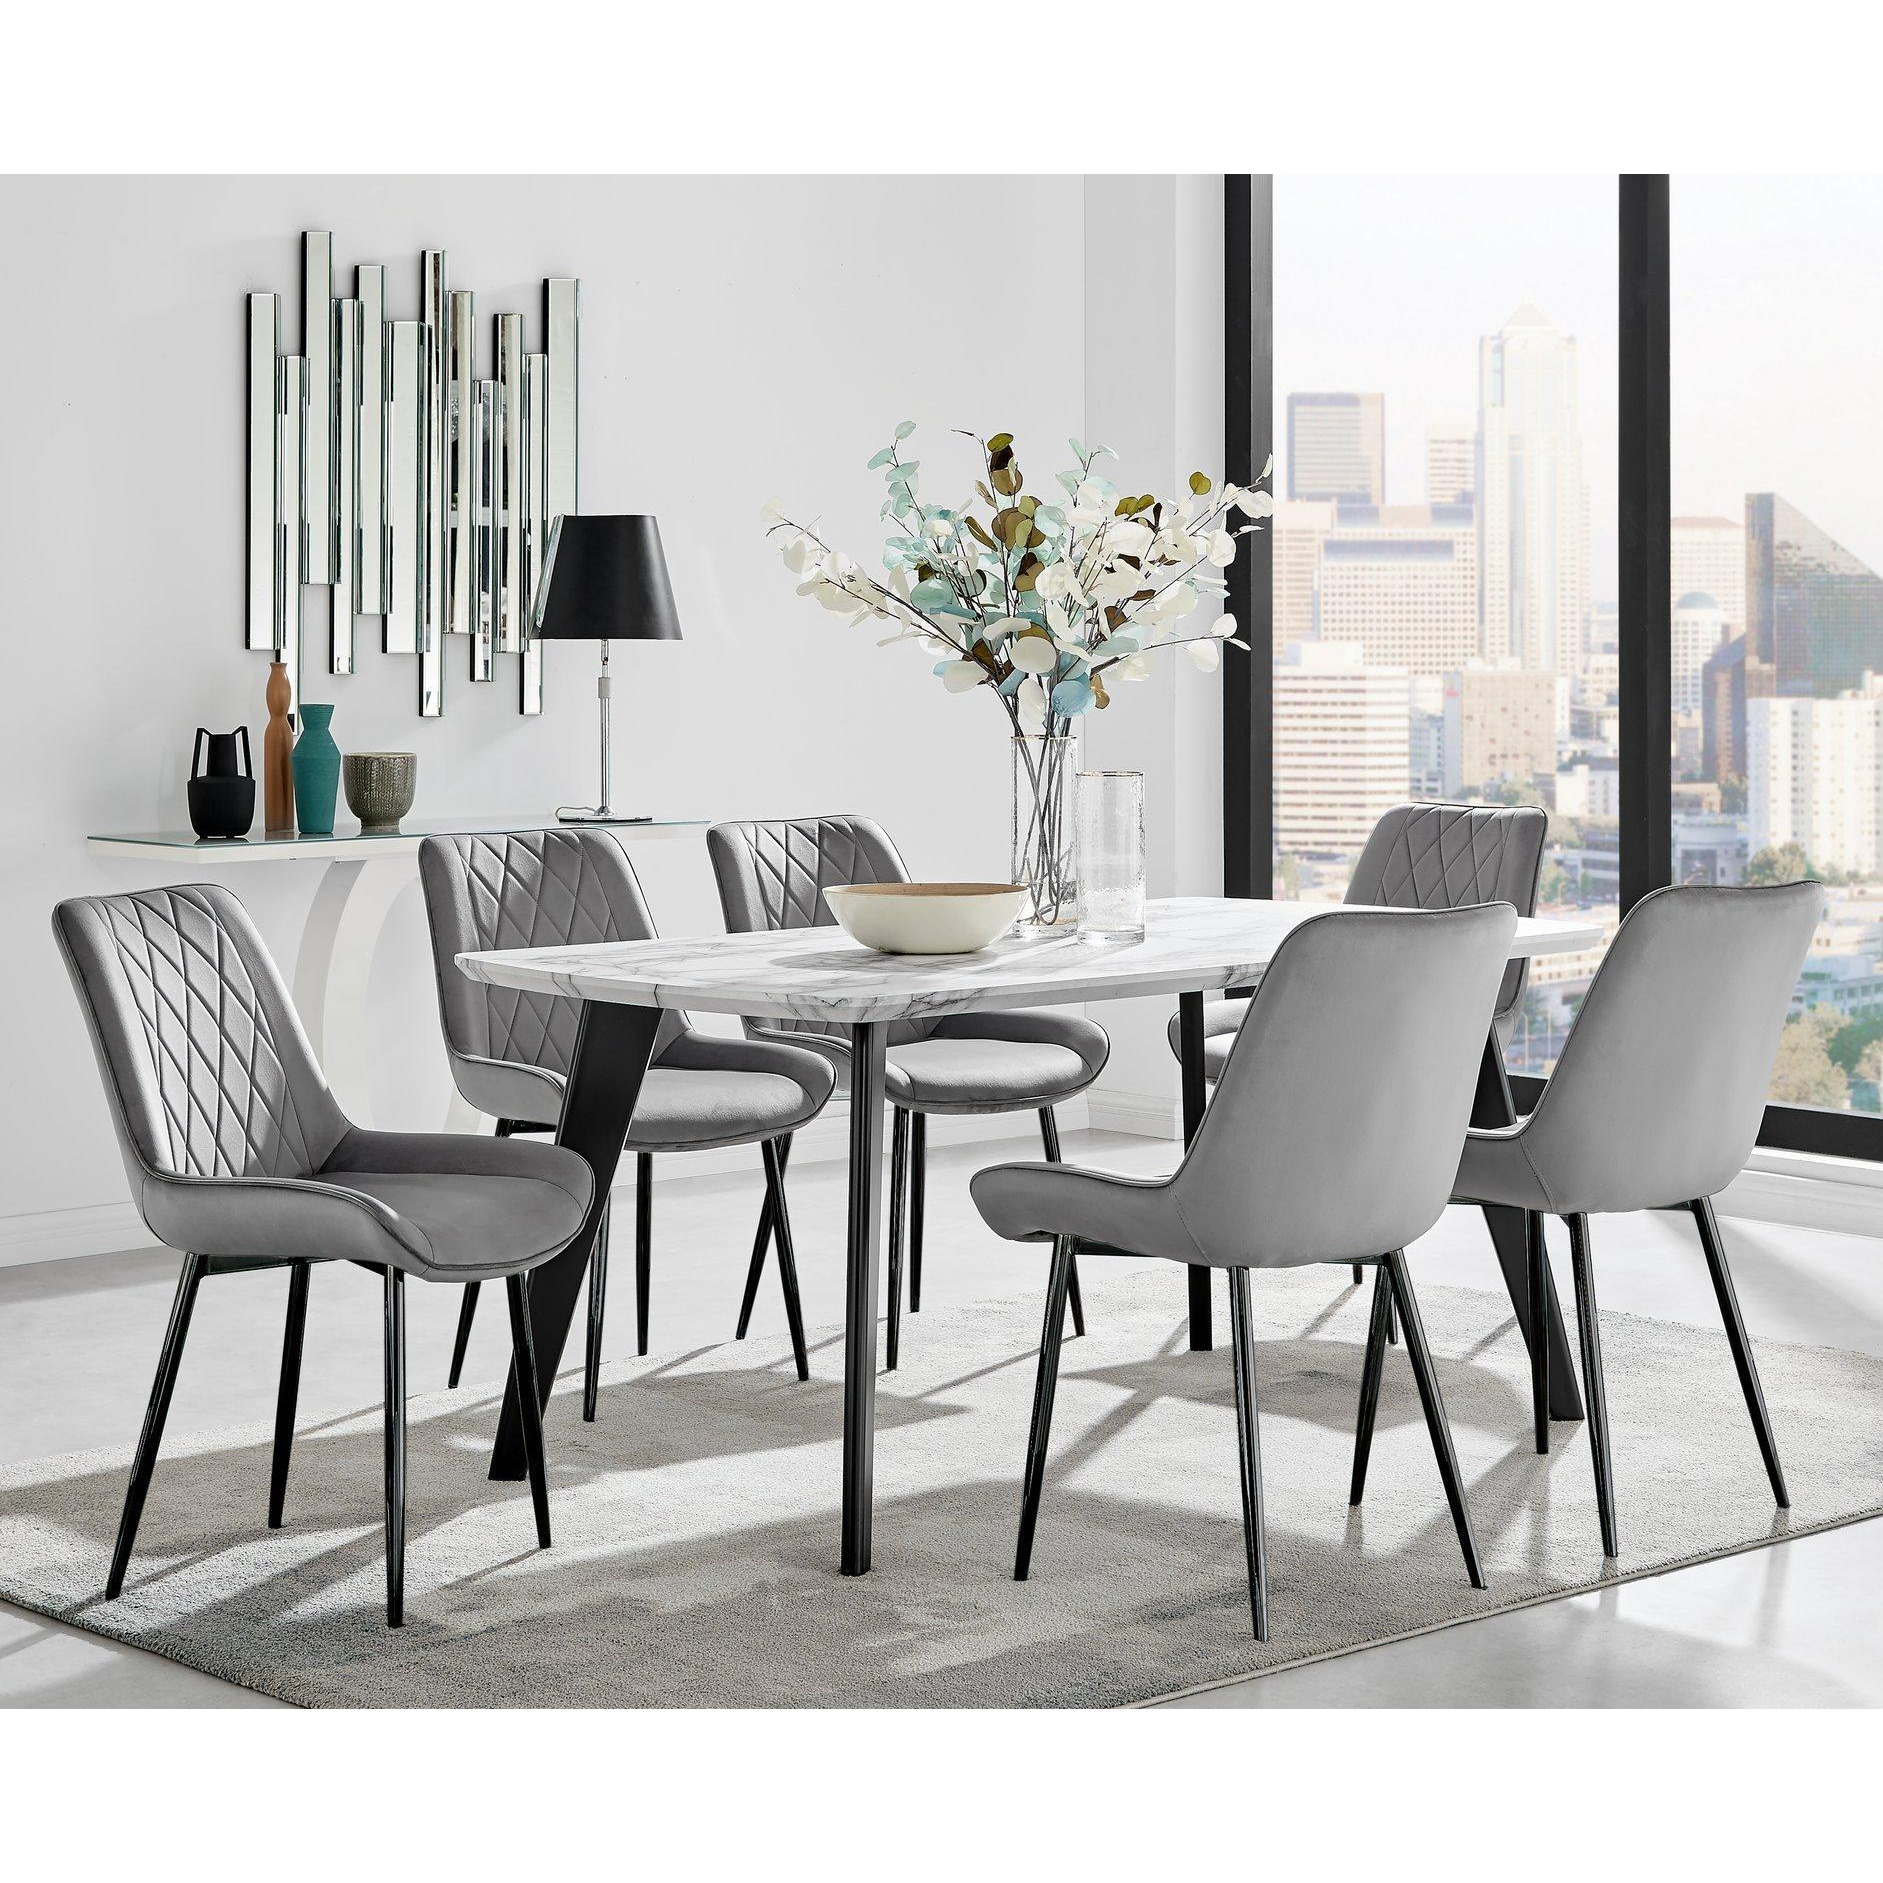 Andria White Marble Effect & Black Leg 6 Seater Dining Table and 6 Pesaro Soft Velvet Chairs - image 1